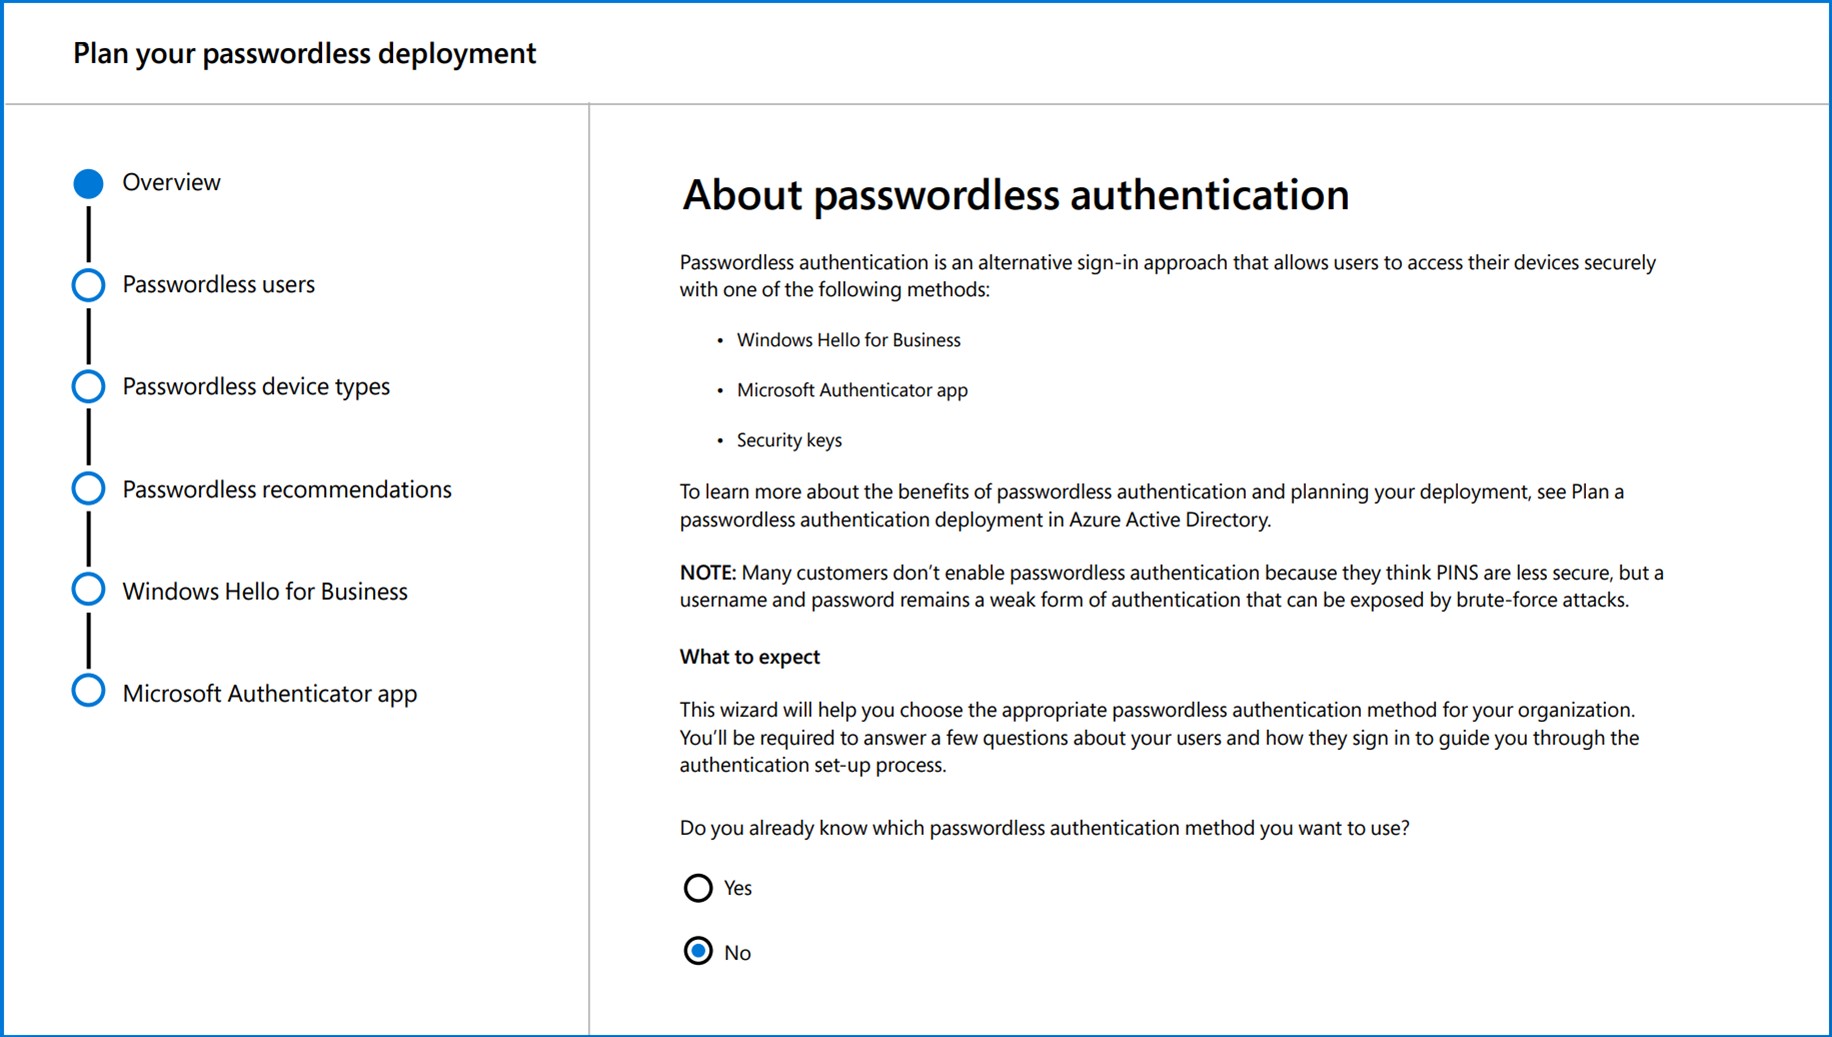 Password authentication sign in approaches include Windows Hello for Business, the Microsoft Authenticator App, and Security Keys.